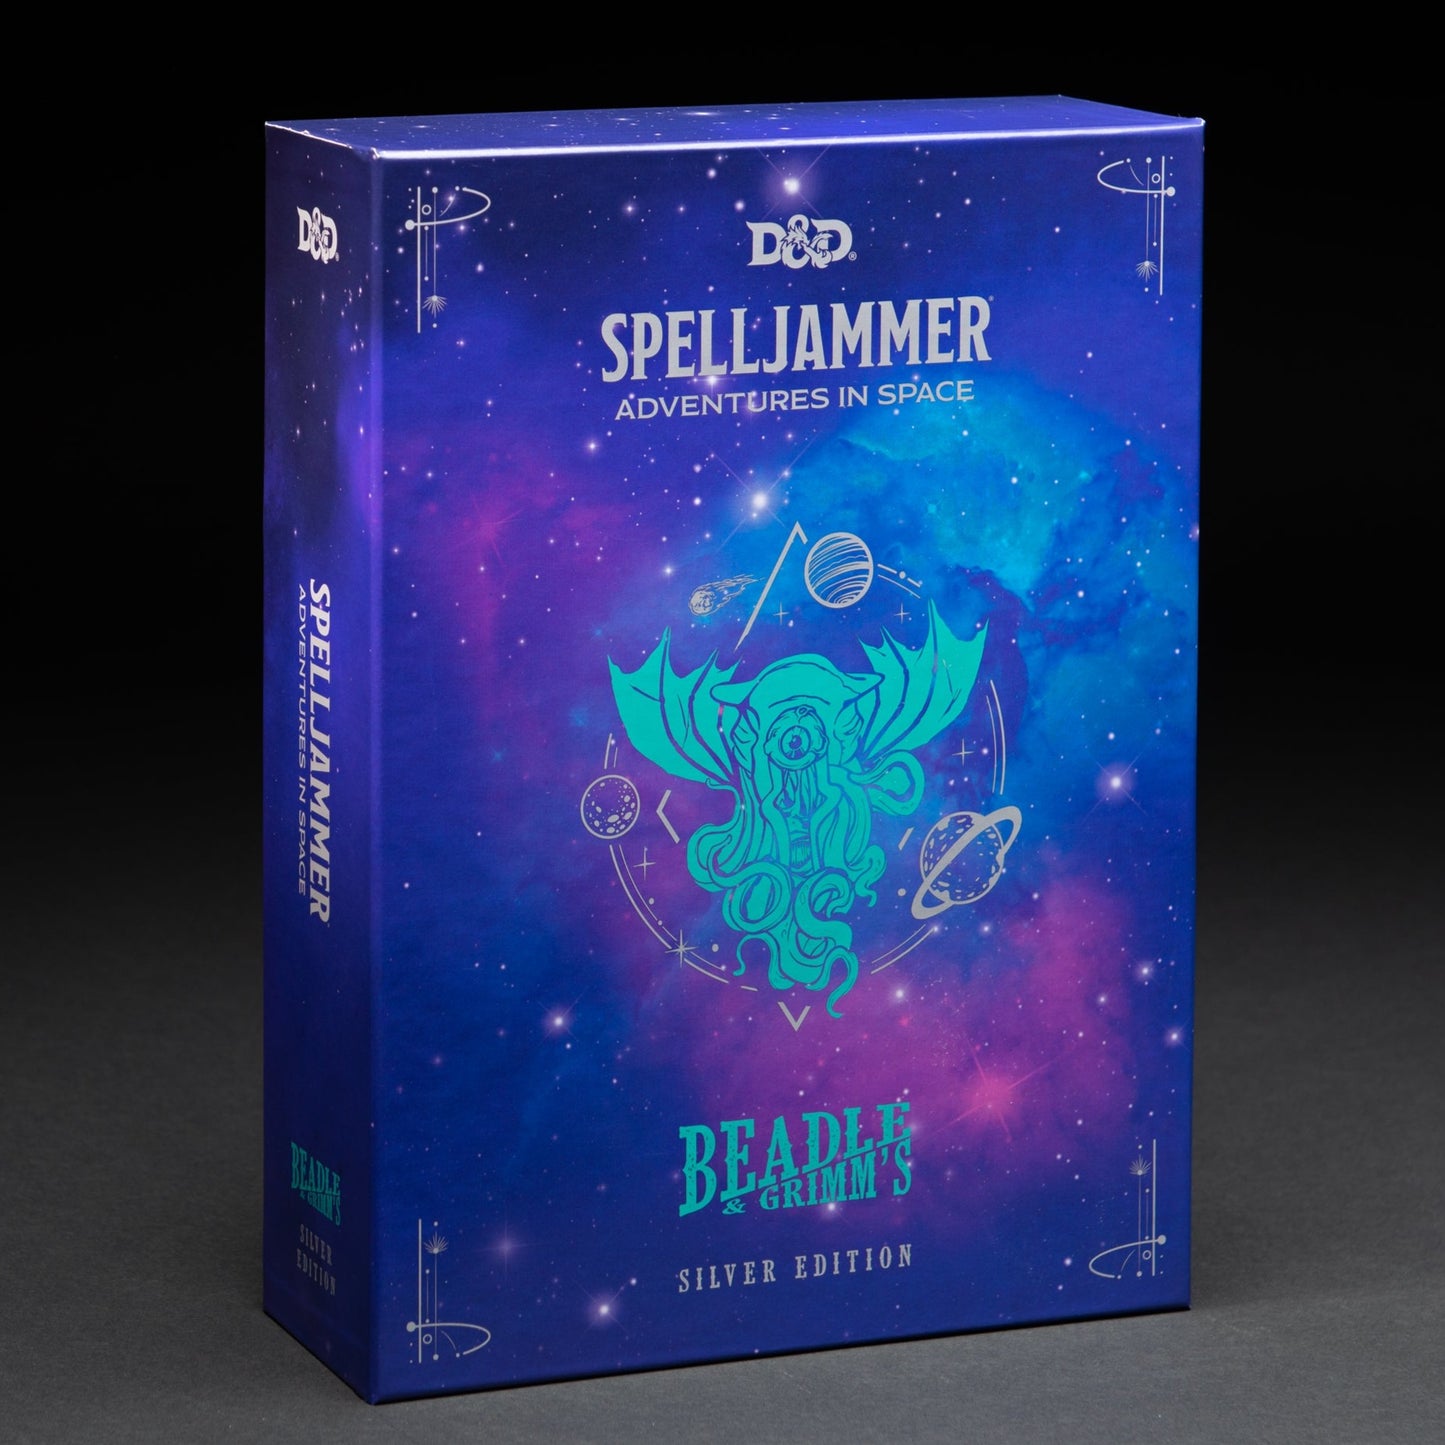 Silver Edition of Spelljammer: Adventures in Space